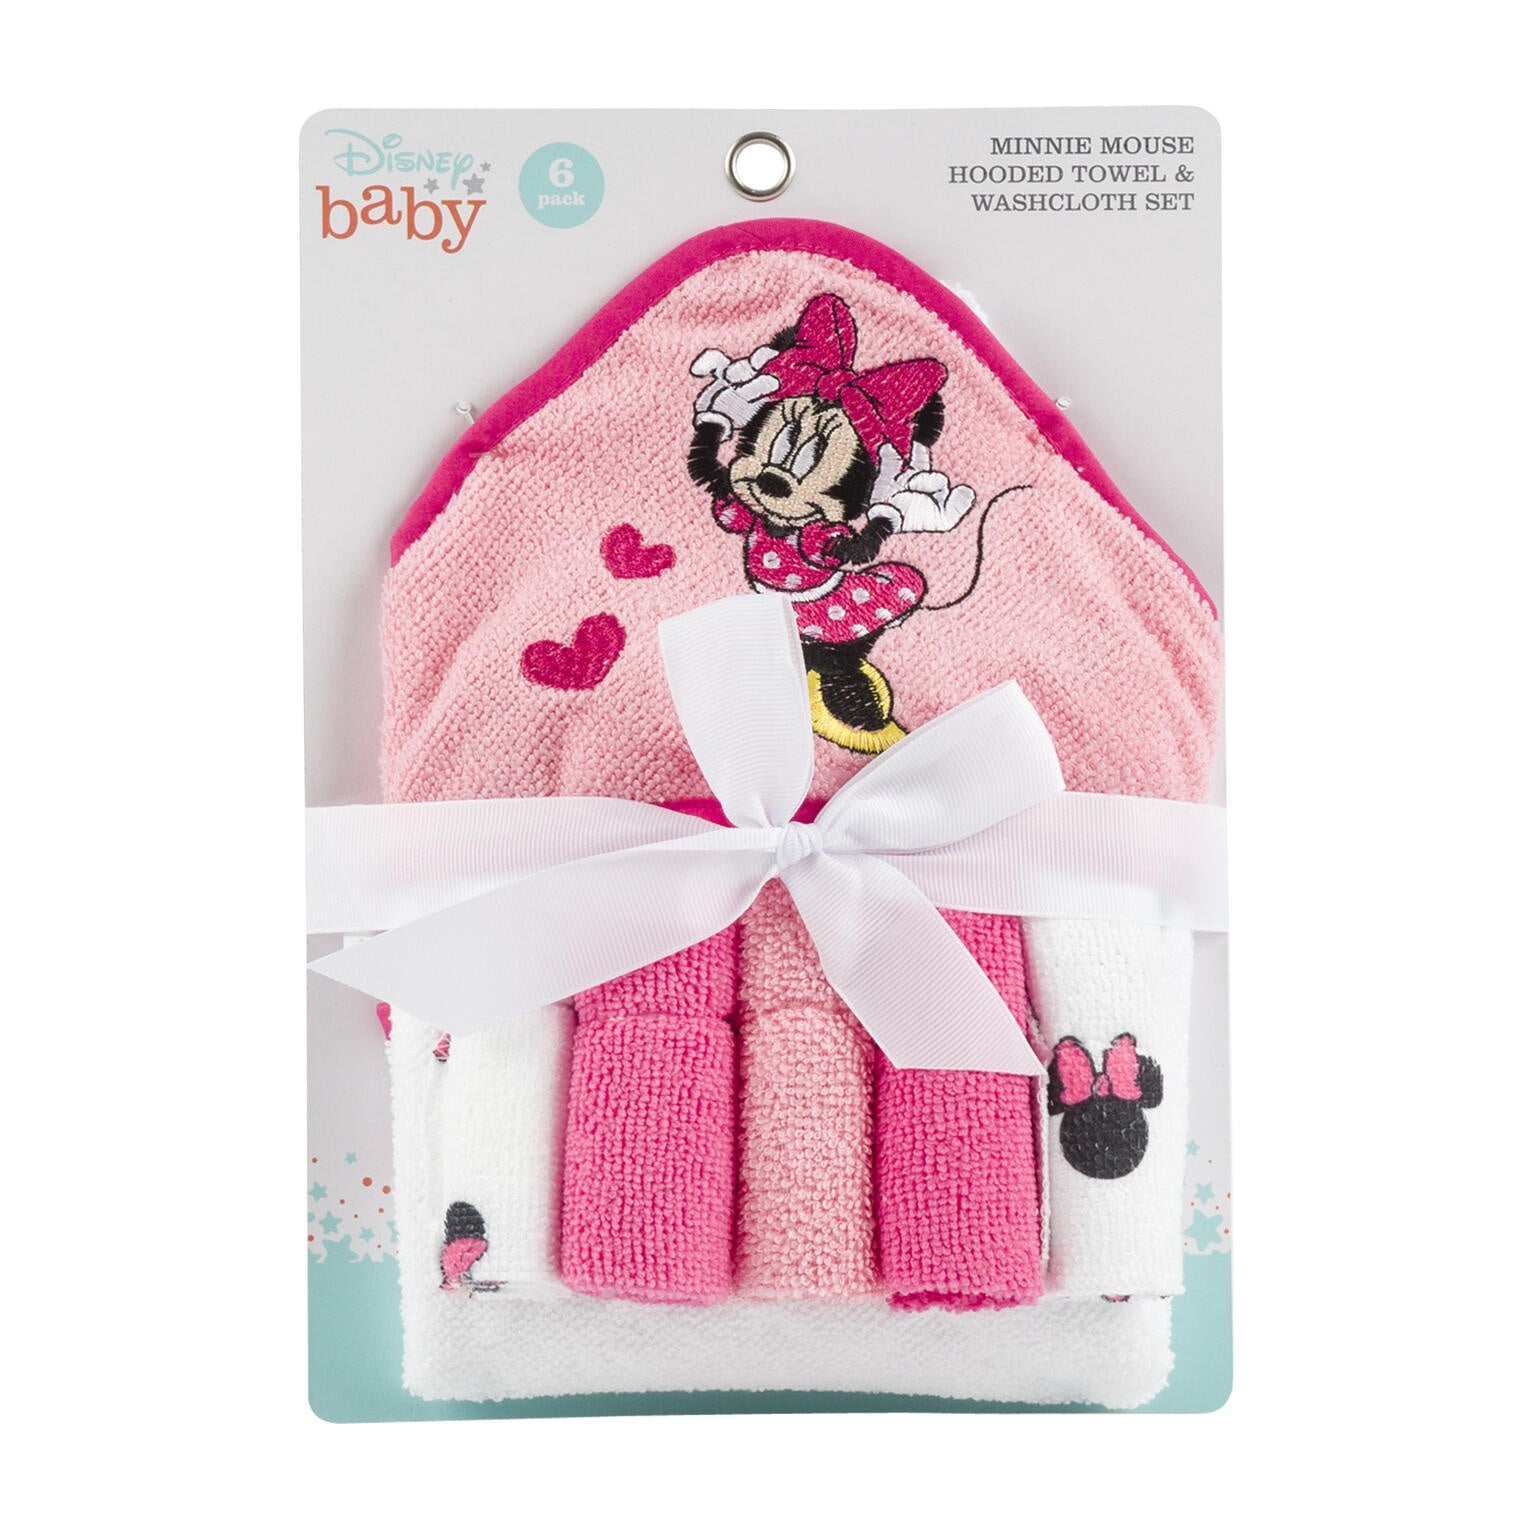 Minnie Mouse Hooded Towel and Washcloth 6pc